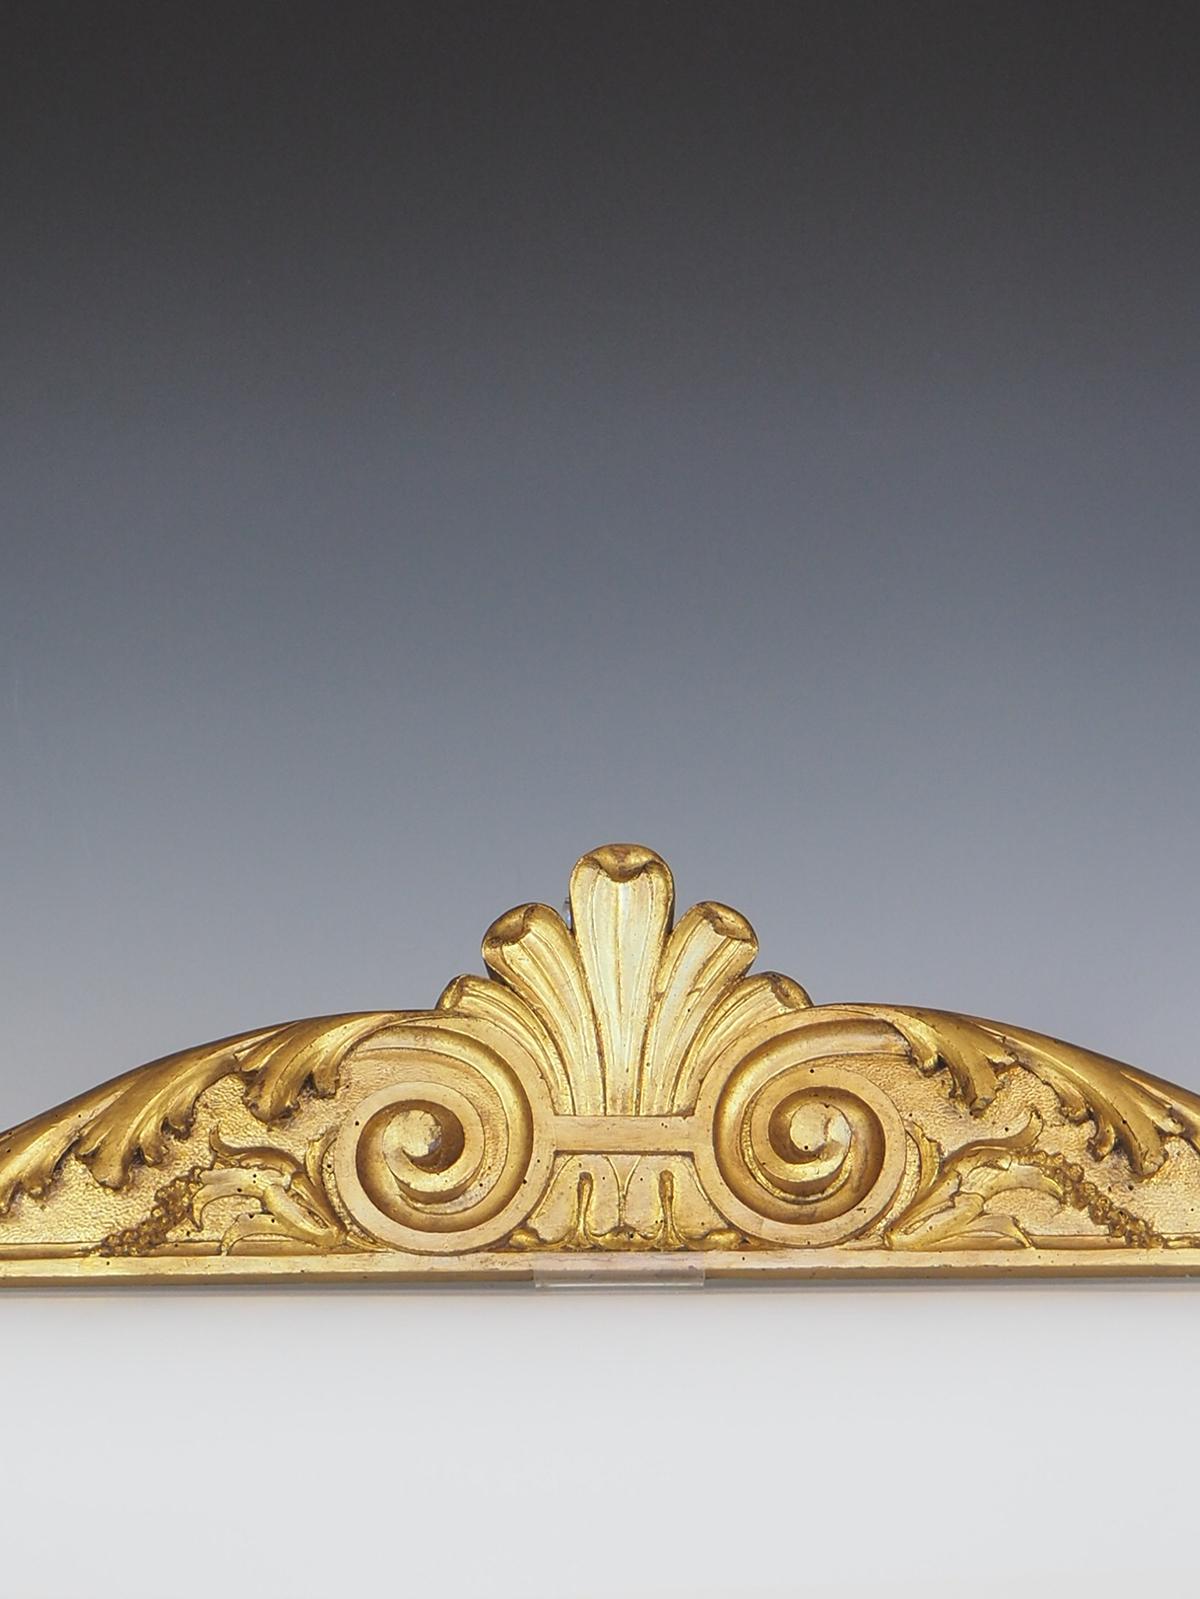 Set of three 19th Century Italian Giltwood Over Door Pediments is a highly decorative and visually striking addition to any interior space. Crafted with meticulous attention to detail, these architectural pieces feature a stunning combination of